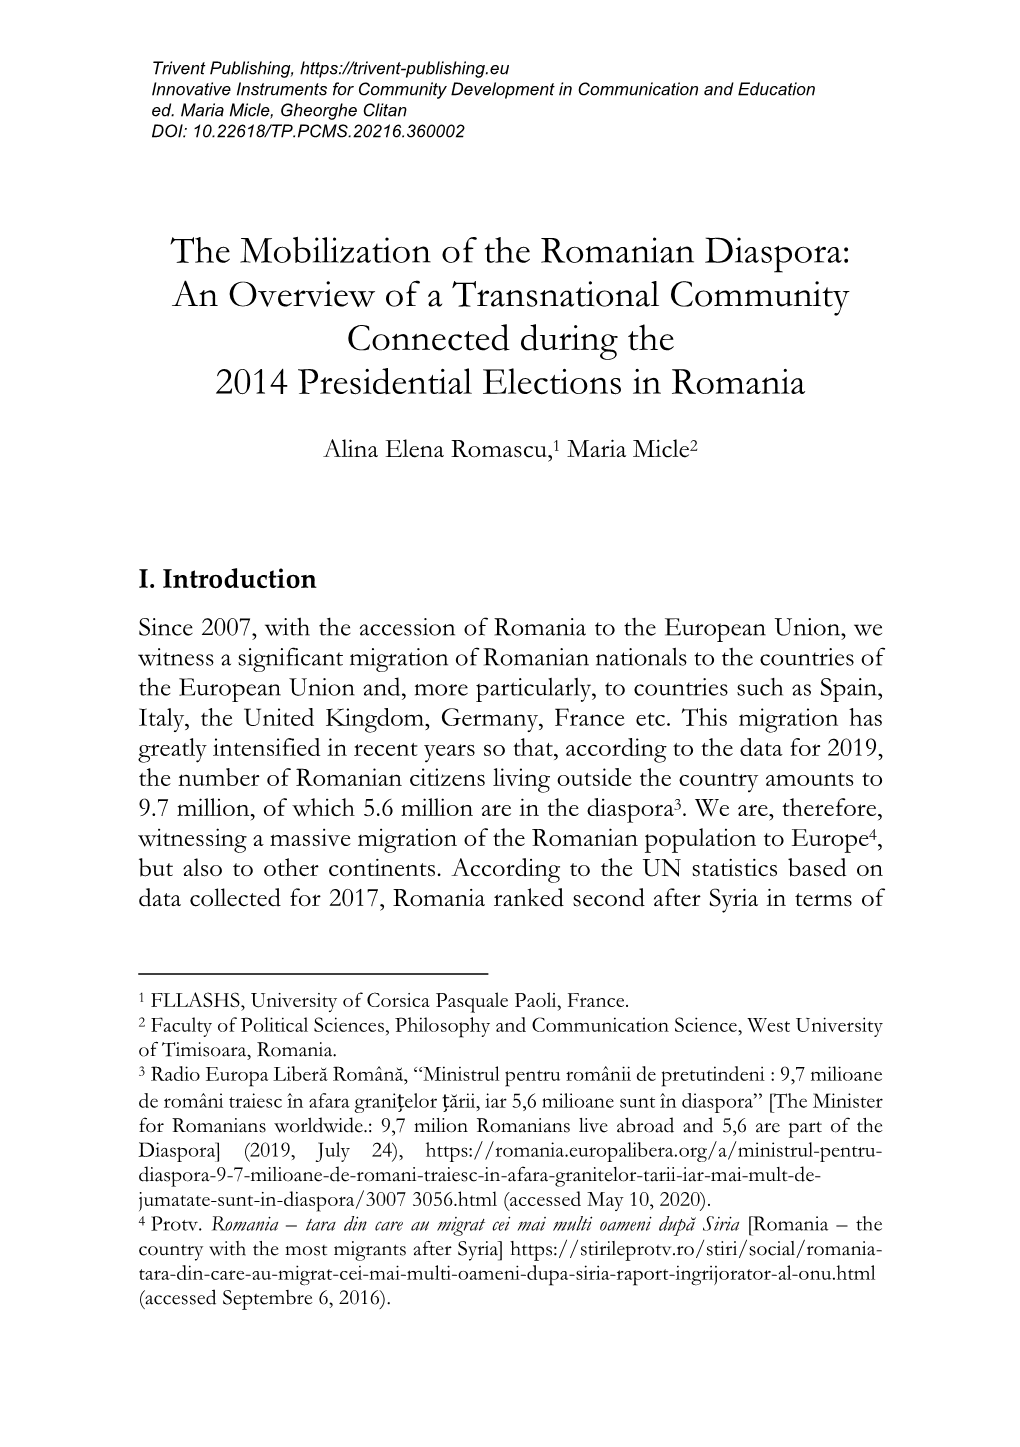 The Mobilization of the Romanian Diaspora: an Overview of a Transnational Community Connected During the 2014 Presidential Elections in Romania